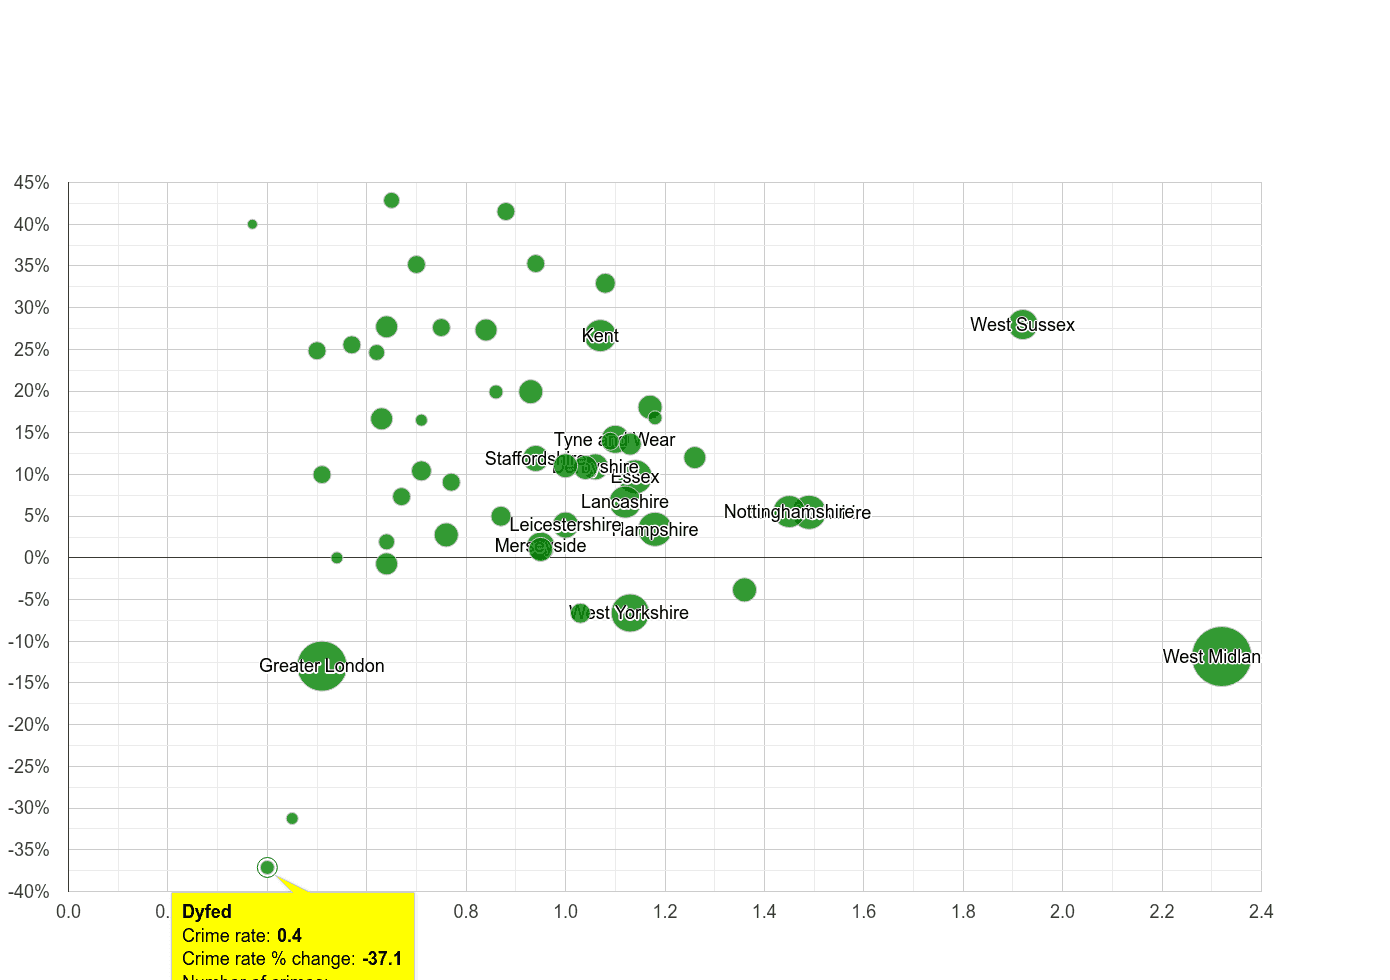 Dyfed possession of weapons crime rate compared to other counties